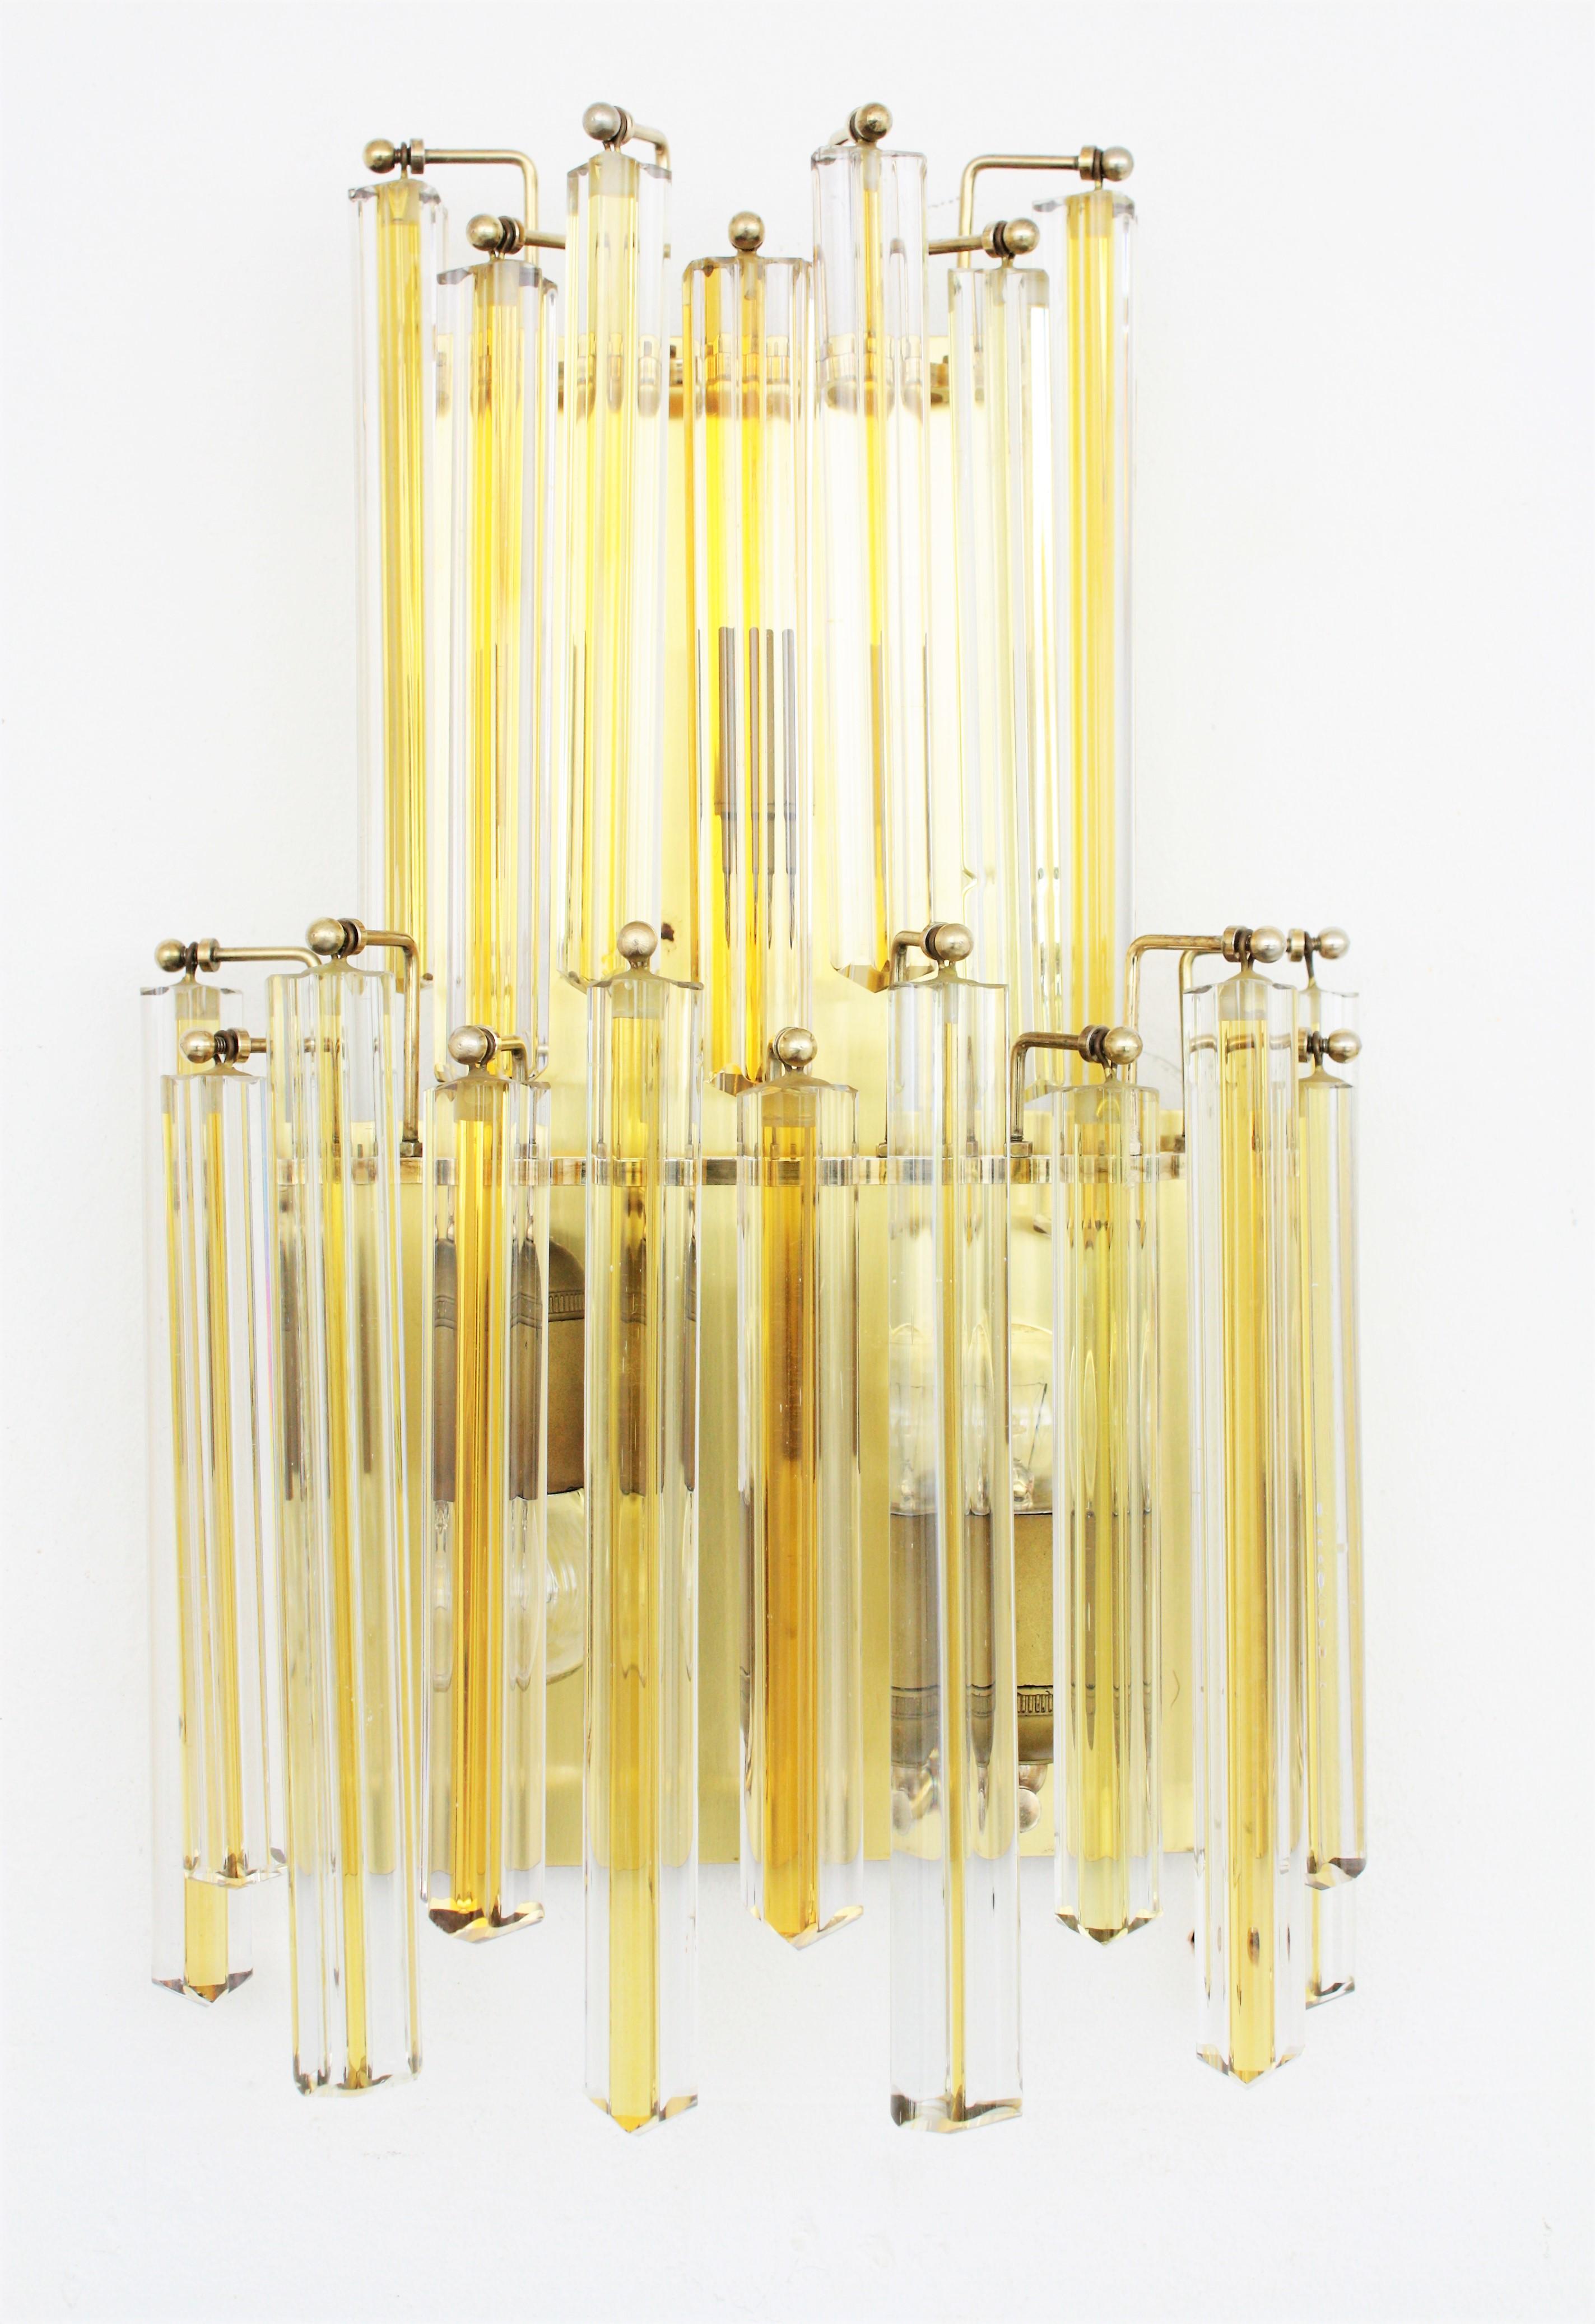 Unmatching Pair of Mid-century Modern two-light Murano glass wall sconces attributed to Venini. Italy, 1960s.
These wall lights are made with clear crystal triedri prysms with a yellow / amber filigree in the middle. The large one is made of 17